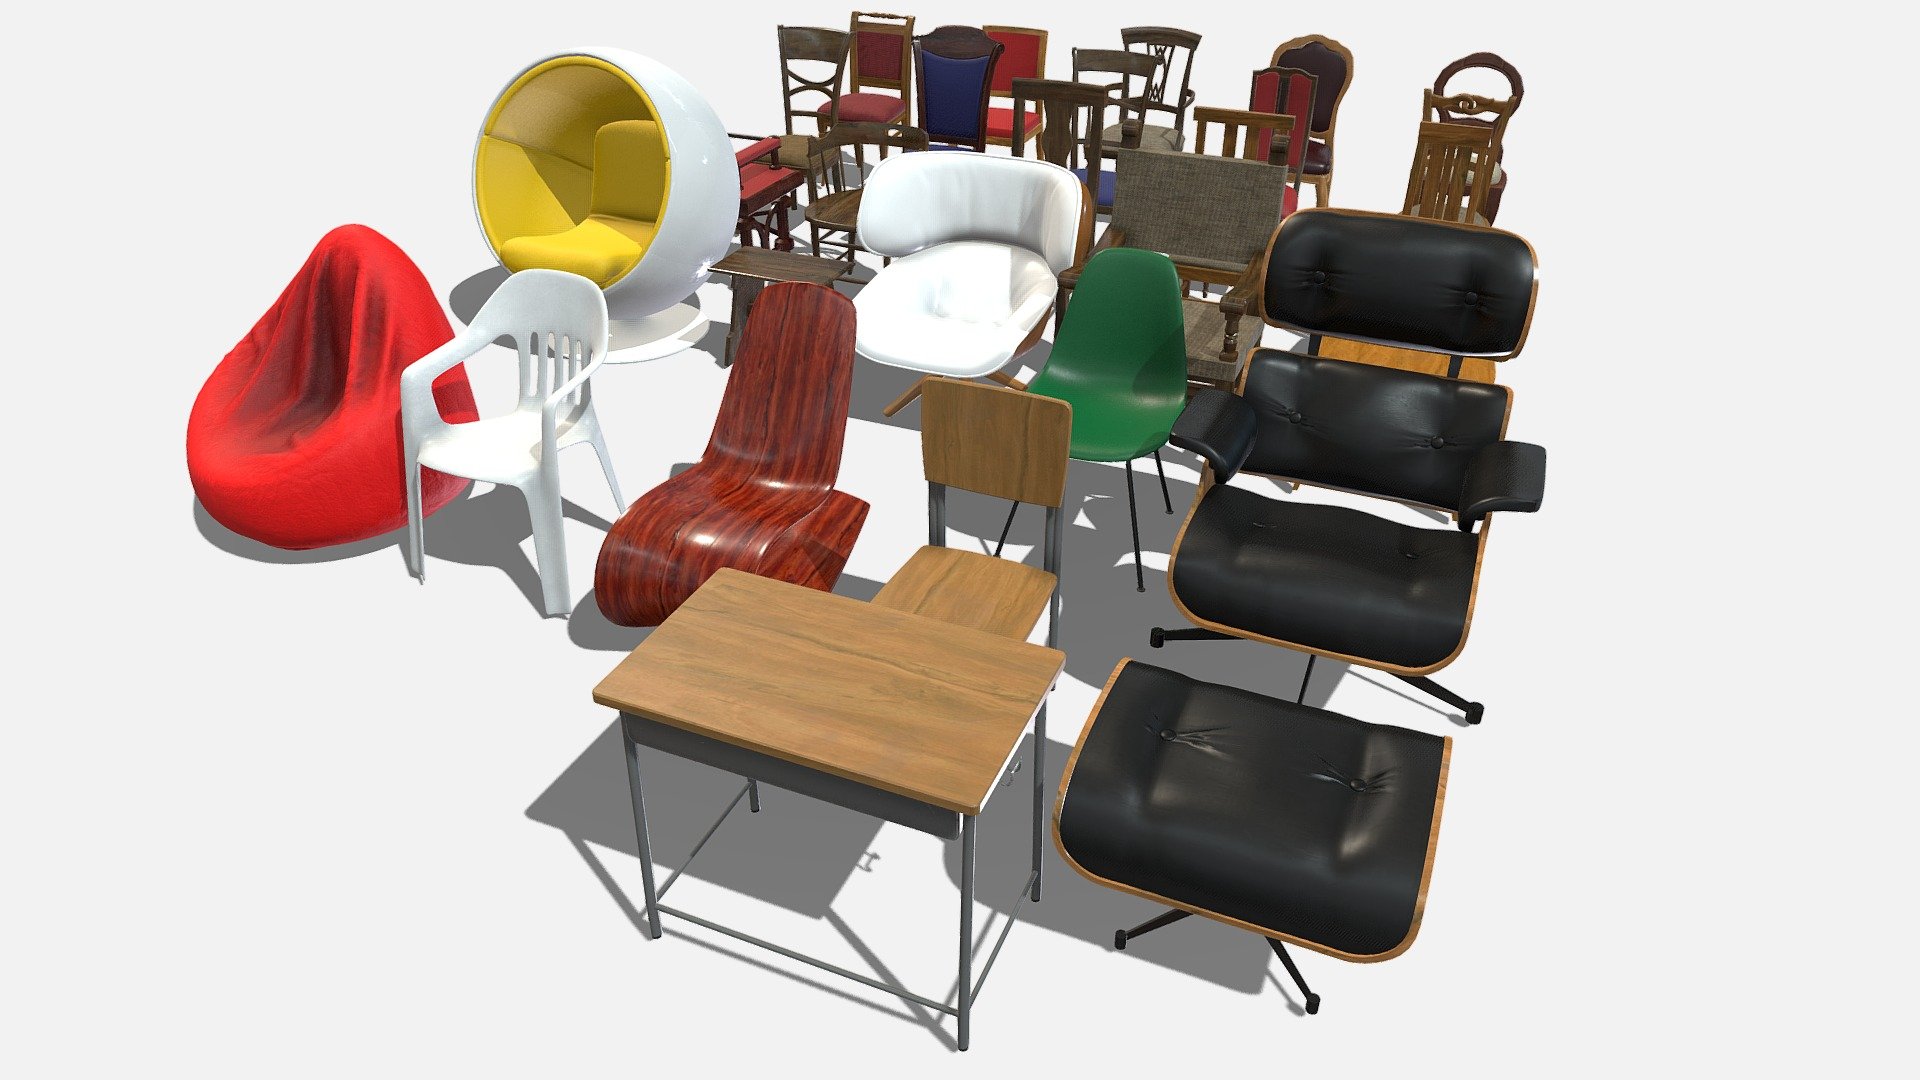 Detailed Description Info:

Model: Chair Collection 
Media Type: 3D Model 
Geometry: Quads/Tris 
Polygon Count: 98702
Vertice Count: 100029
Textures: Yes 
Materials: Yes 
Rigged: No 
Animated: No 
UV Mapped: Yes 
Unwrapped UV's: Yes Non-Overlapping

|||||||||||||||||||||||||||||||||||

Textures formats: PBR textures include specular, gloss, diffuse and normal maps in 2K resolution - Chairs - Buy Royalty Free 3D model by studio lab (@leonlabyk) 3d model